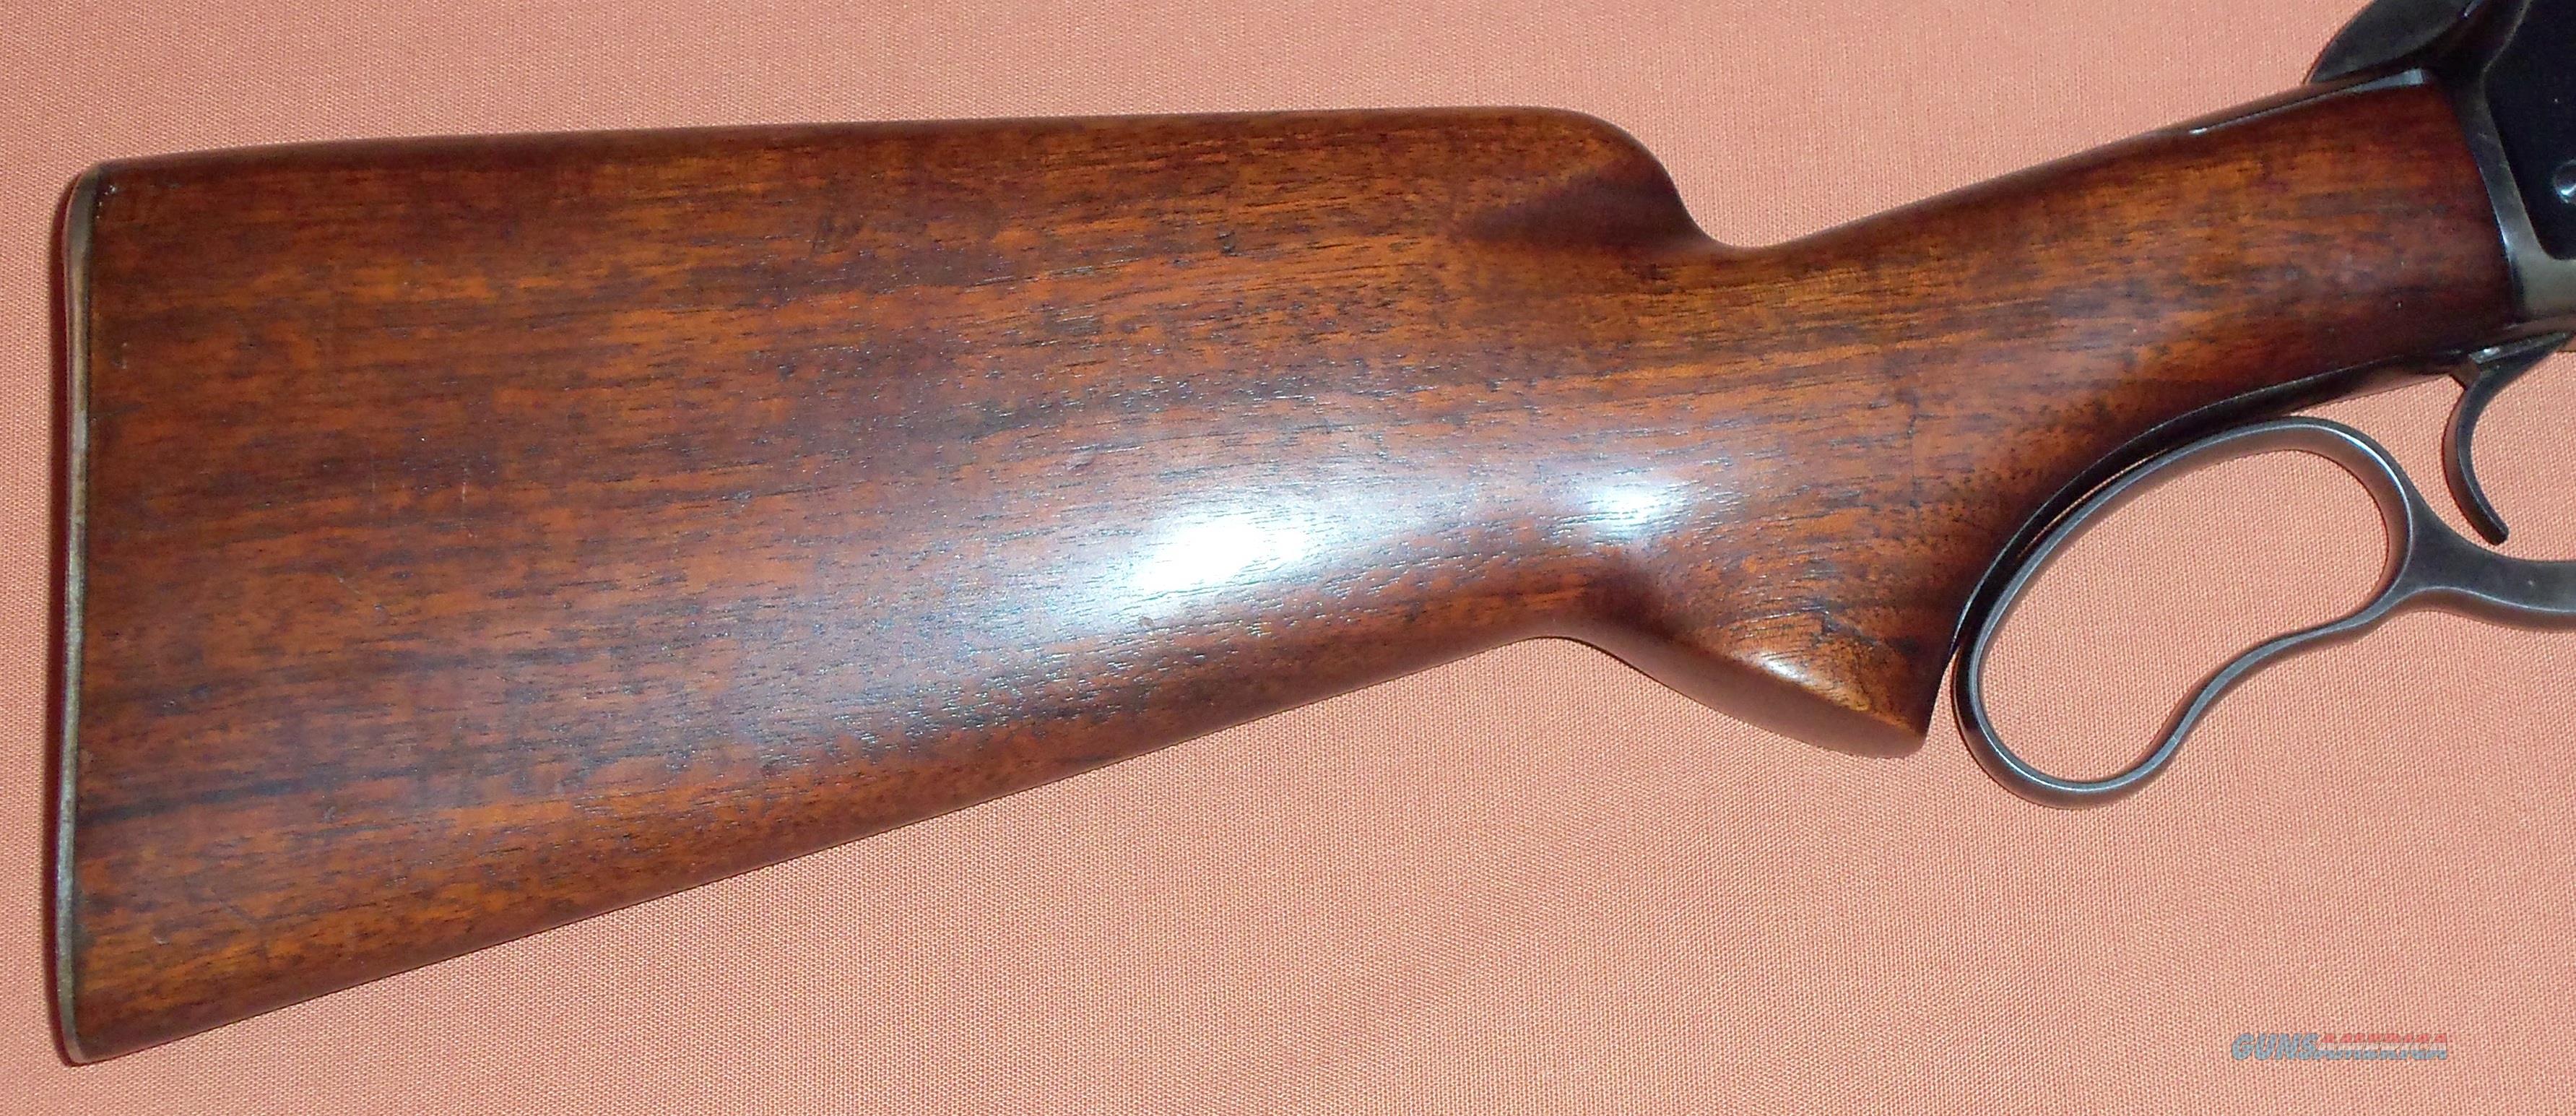 model 67 winchester with deluxe checkering on stock